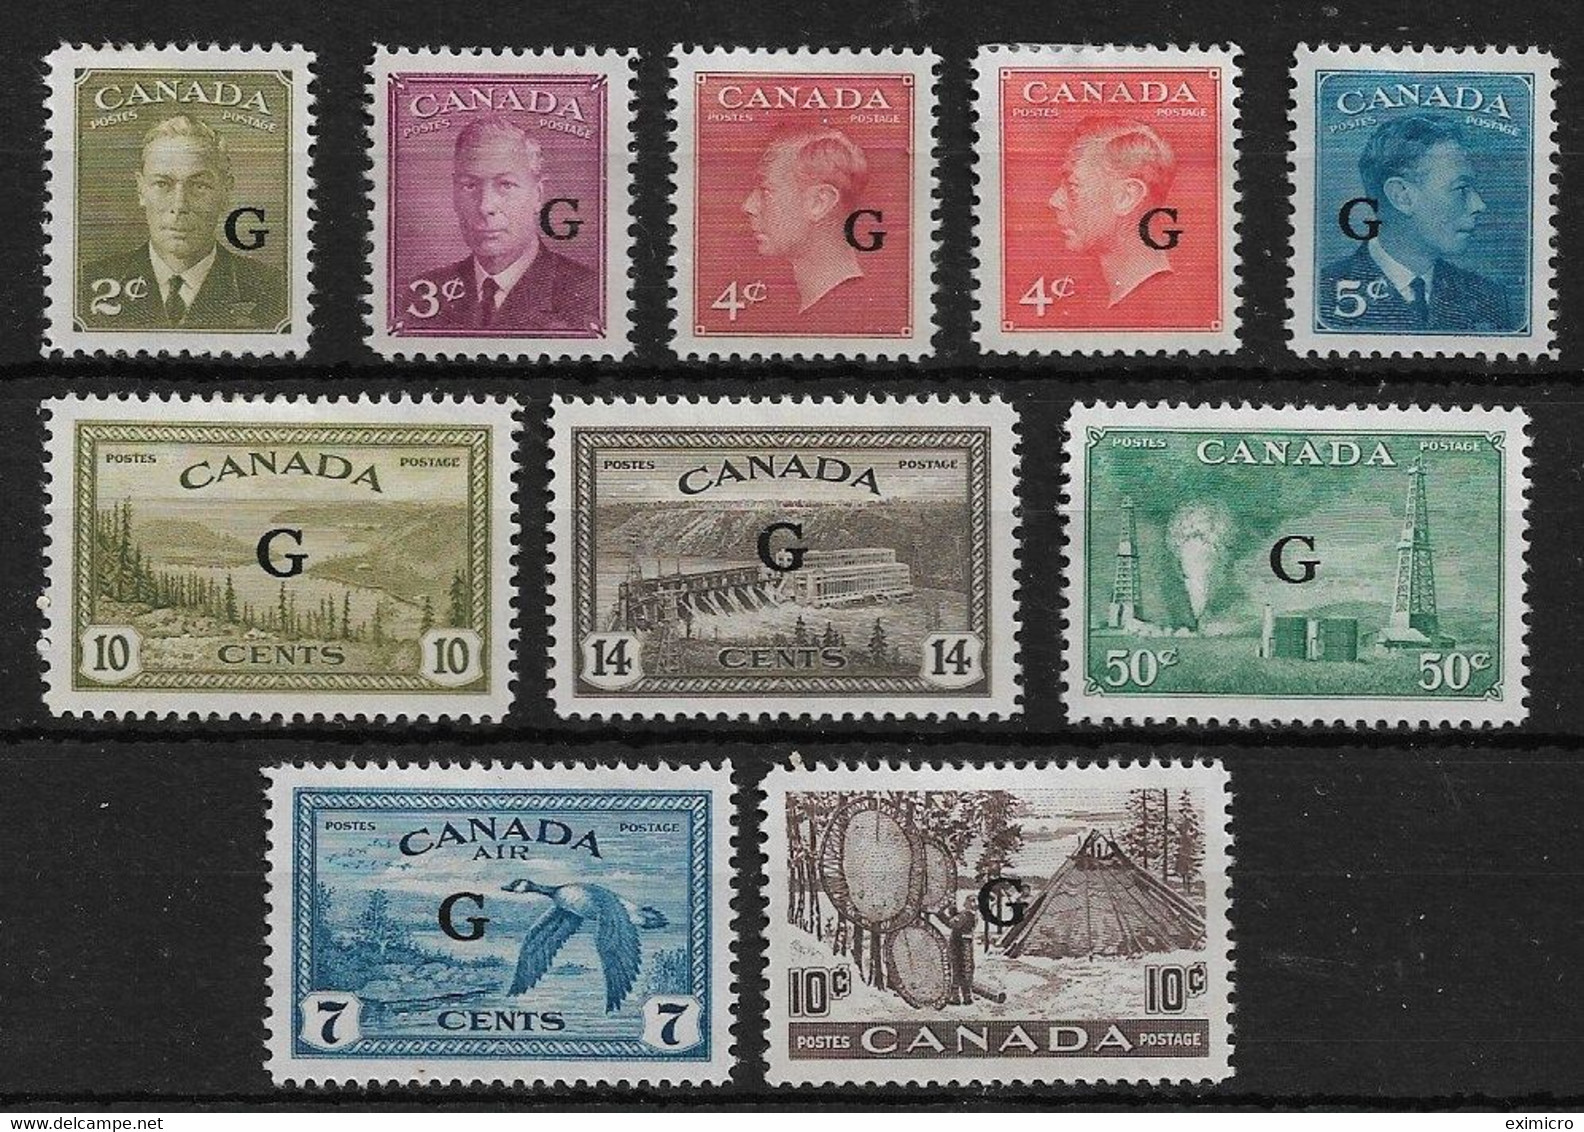 CANADA 1950 - 1952 'G' OVERPRINT OFFICIALS BETWEEN SG O180 And SG O191 MOUNTED MINT Cat £97 - Sovraccarichi